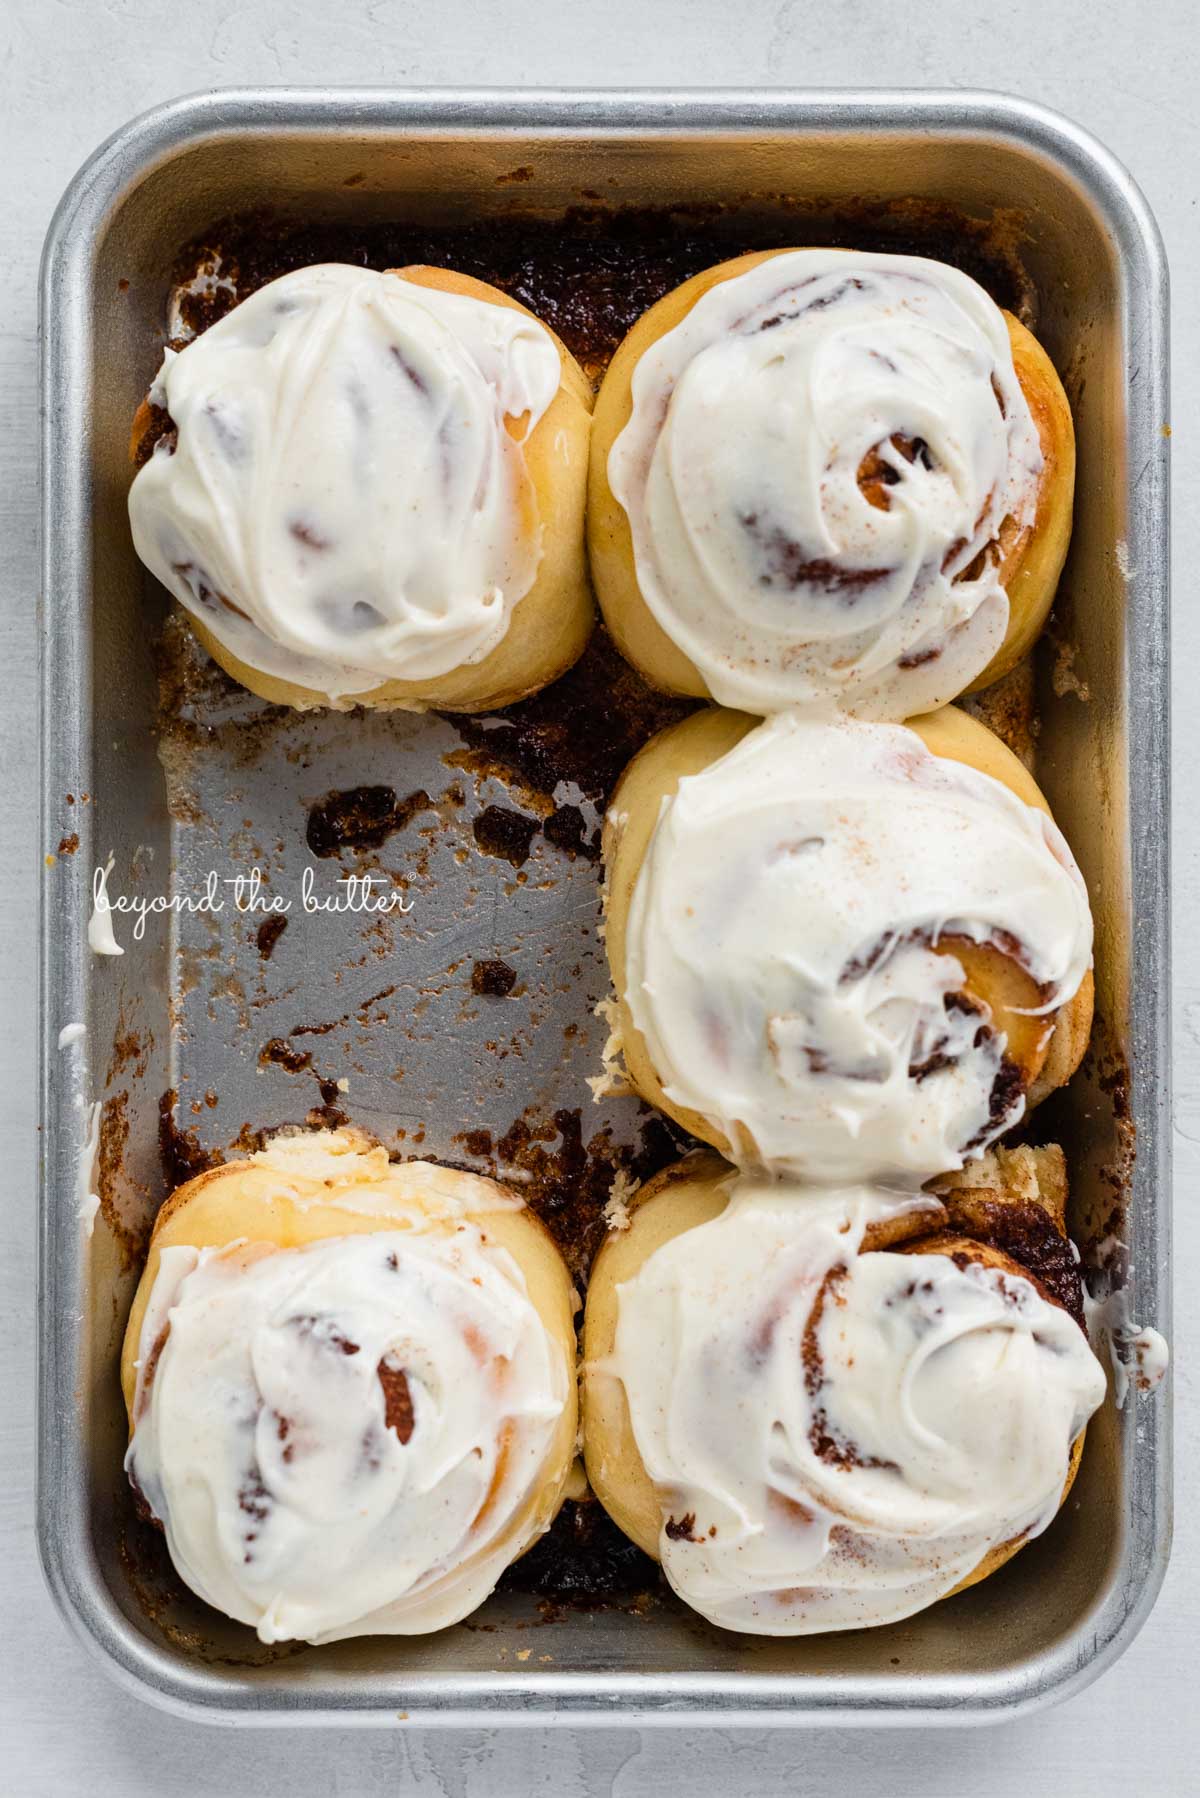 Just frosted small batch cinnamon rolls with one already eaten from BeyondtheButter.com | © Beyond the Butter®